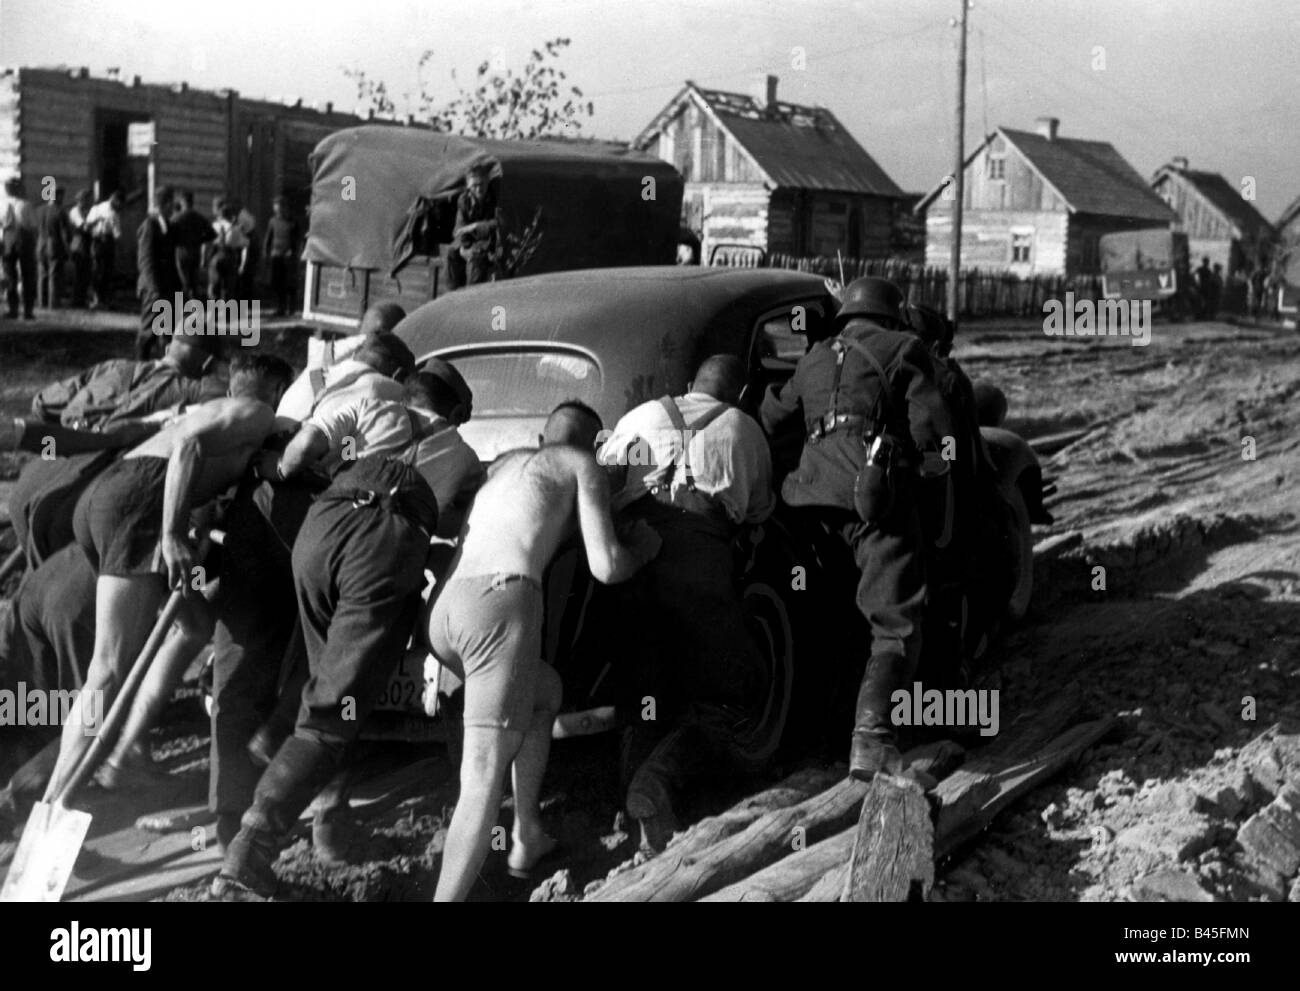 events, Second World War / WWII, Russia 1941, German car stuck in the mud, late summer/autumn 1941, Stock Photo